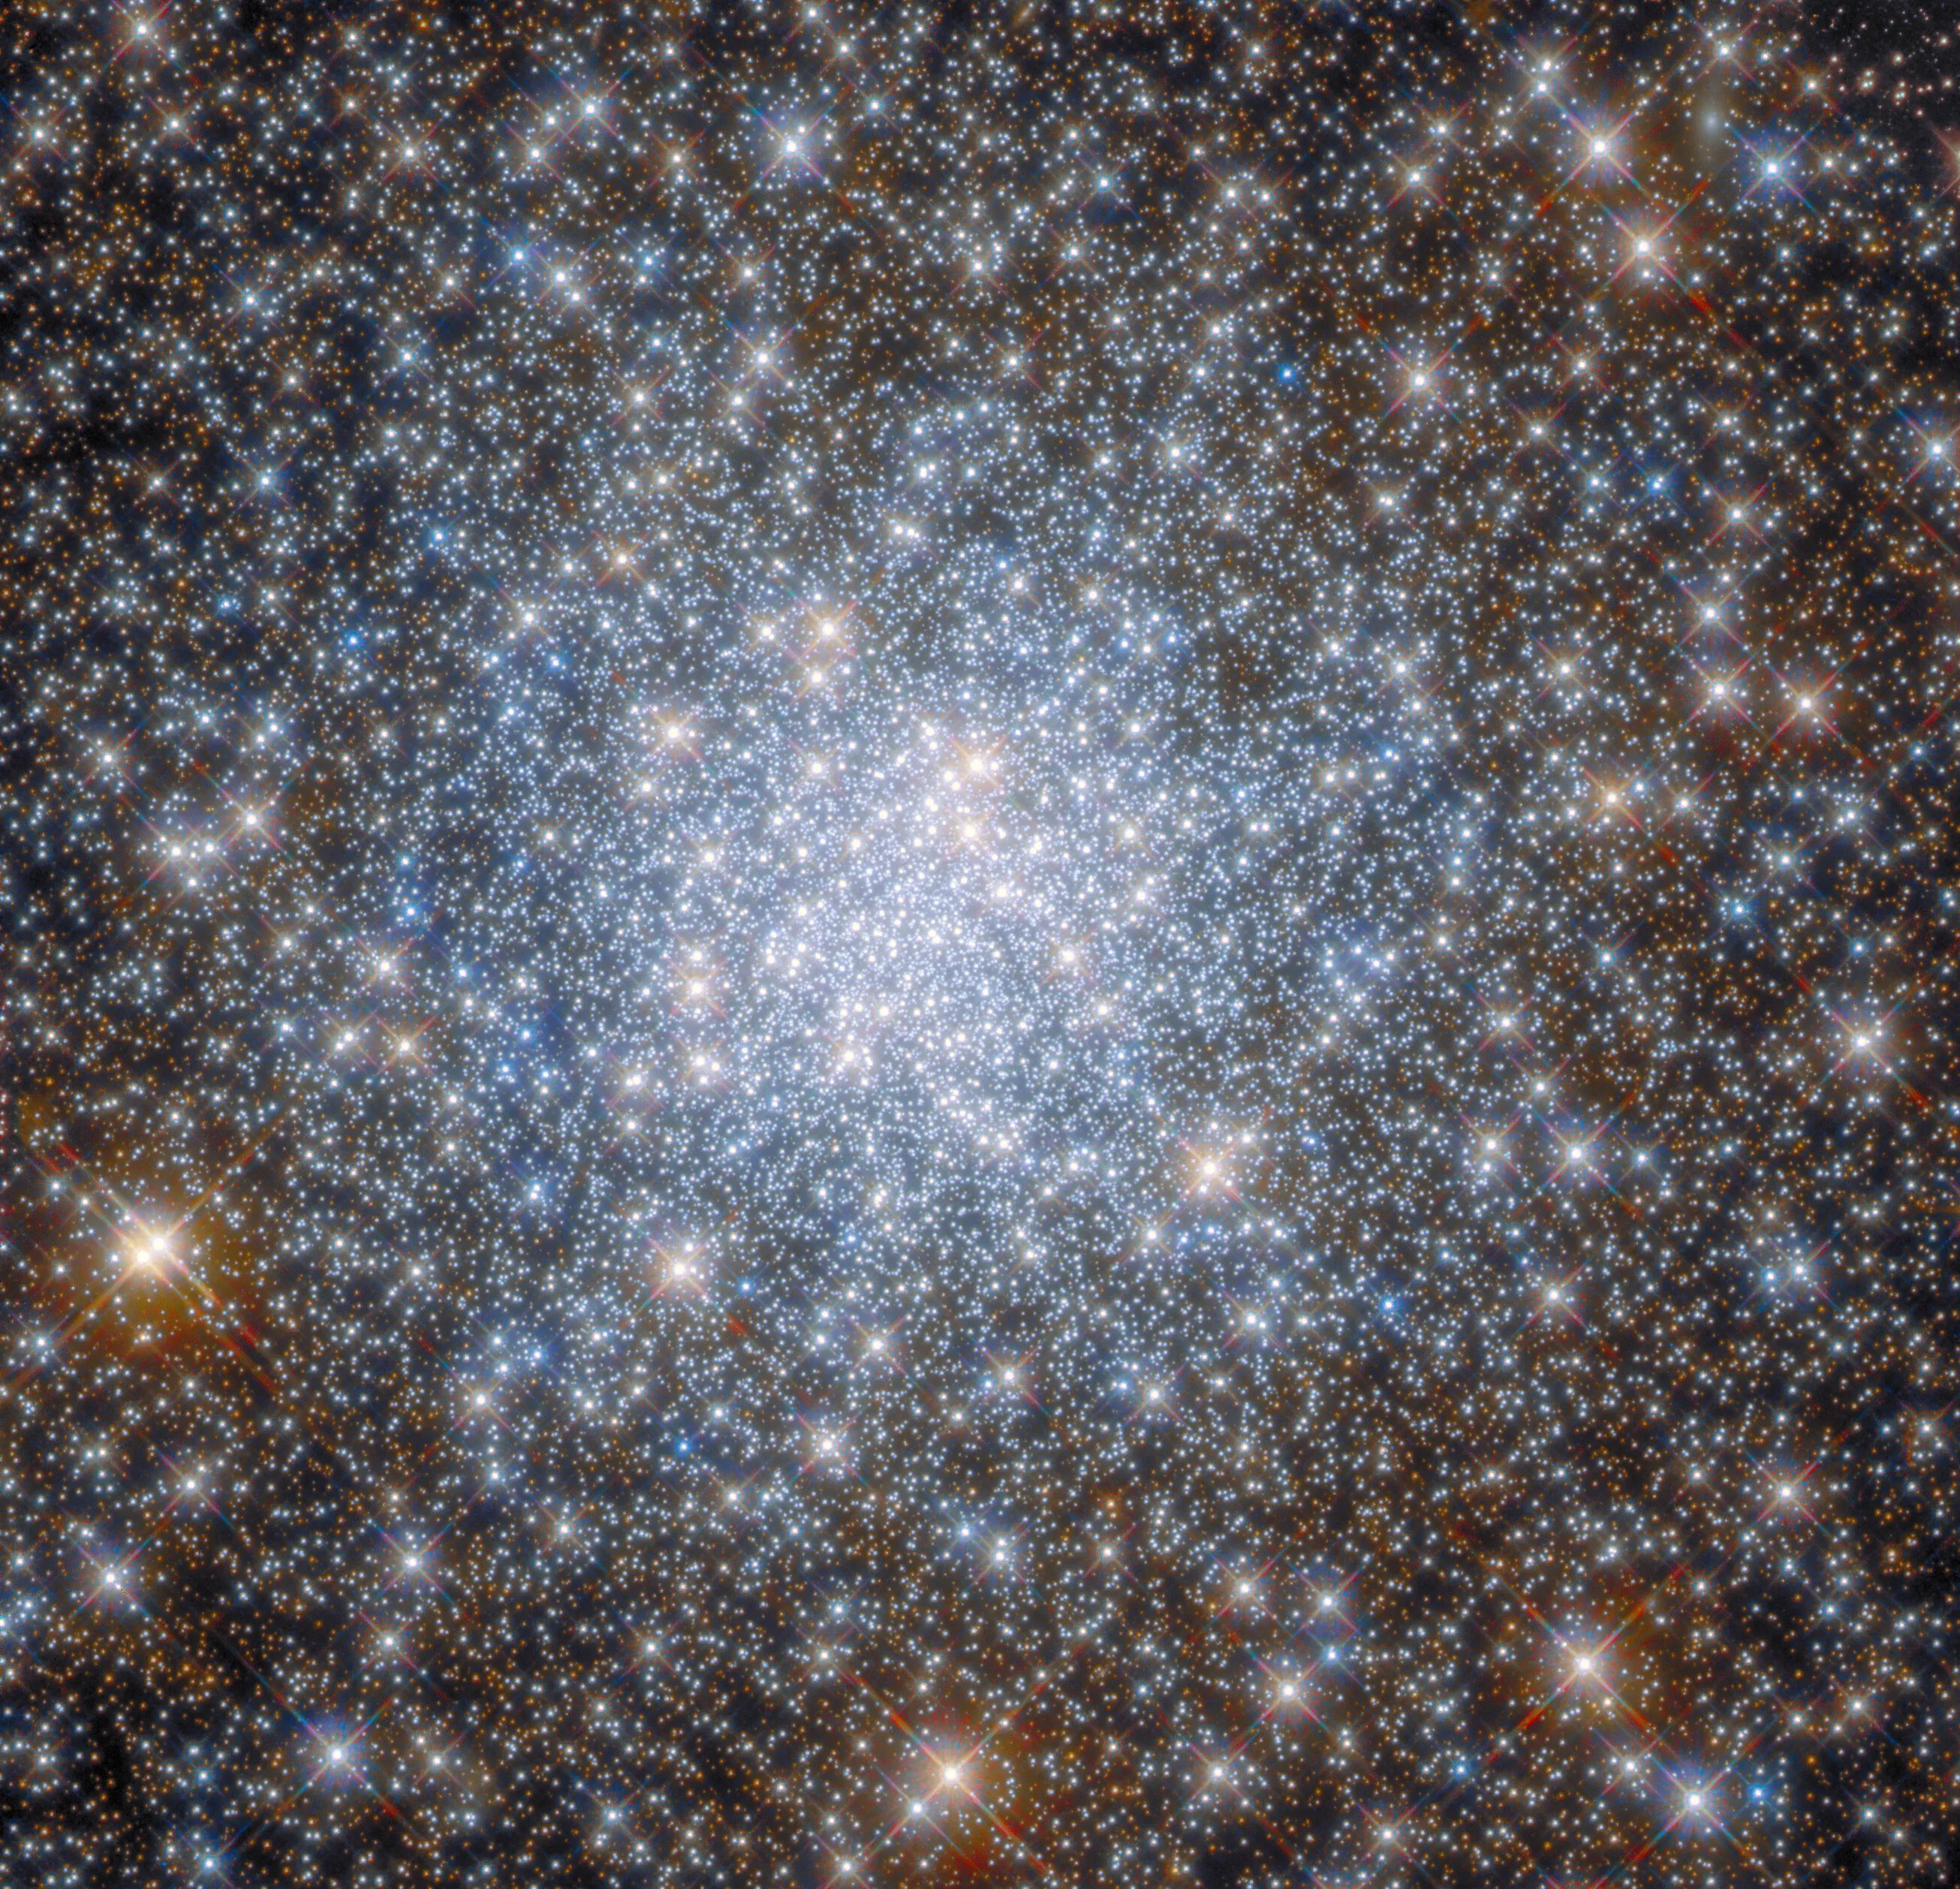 A mass of bright blue-white stars fills the center, gold stars are dotted throughout